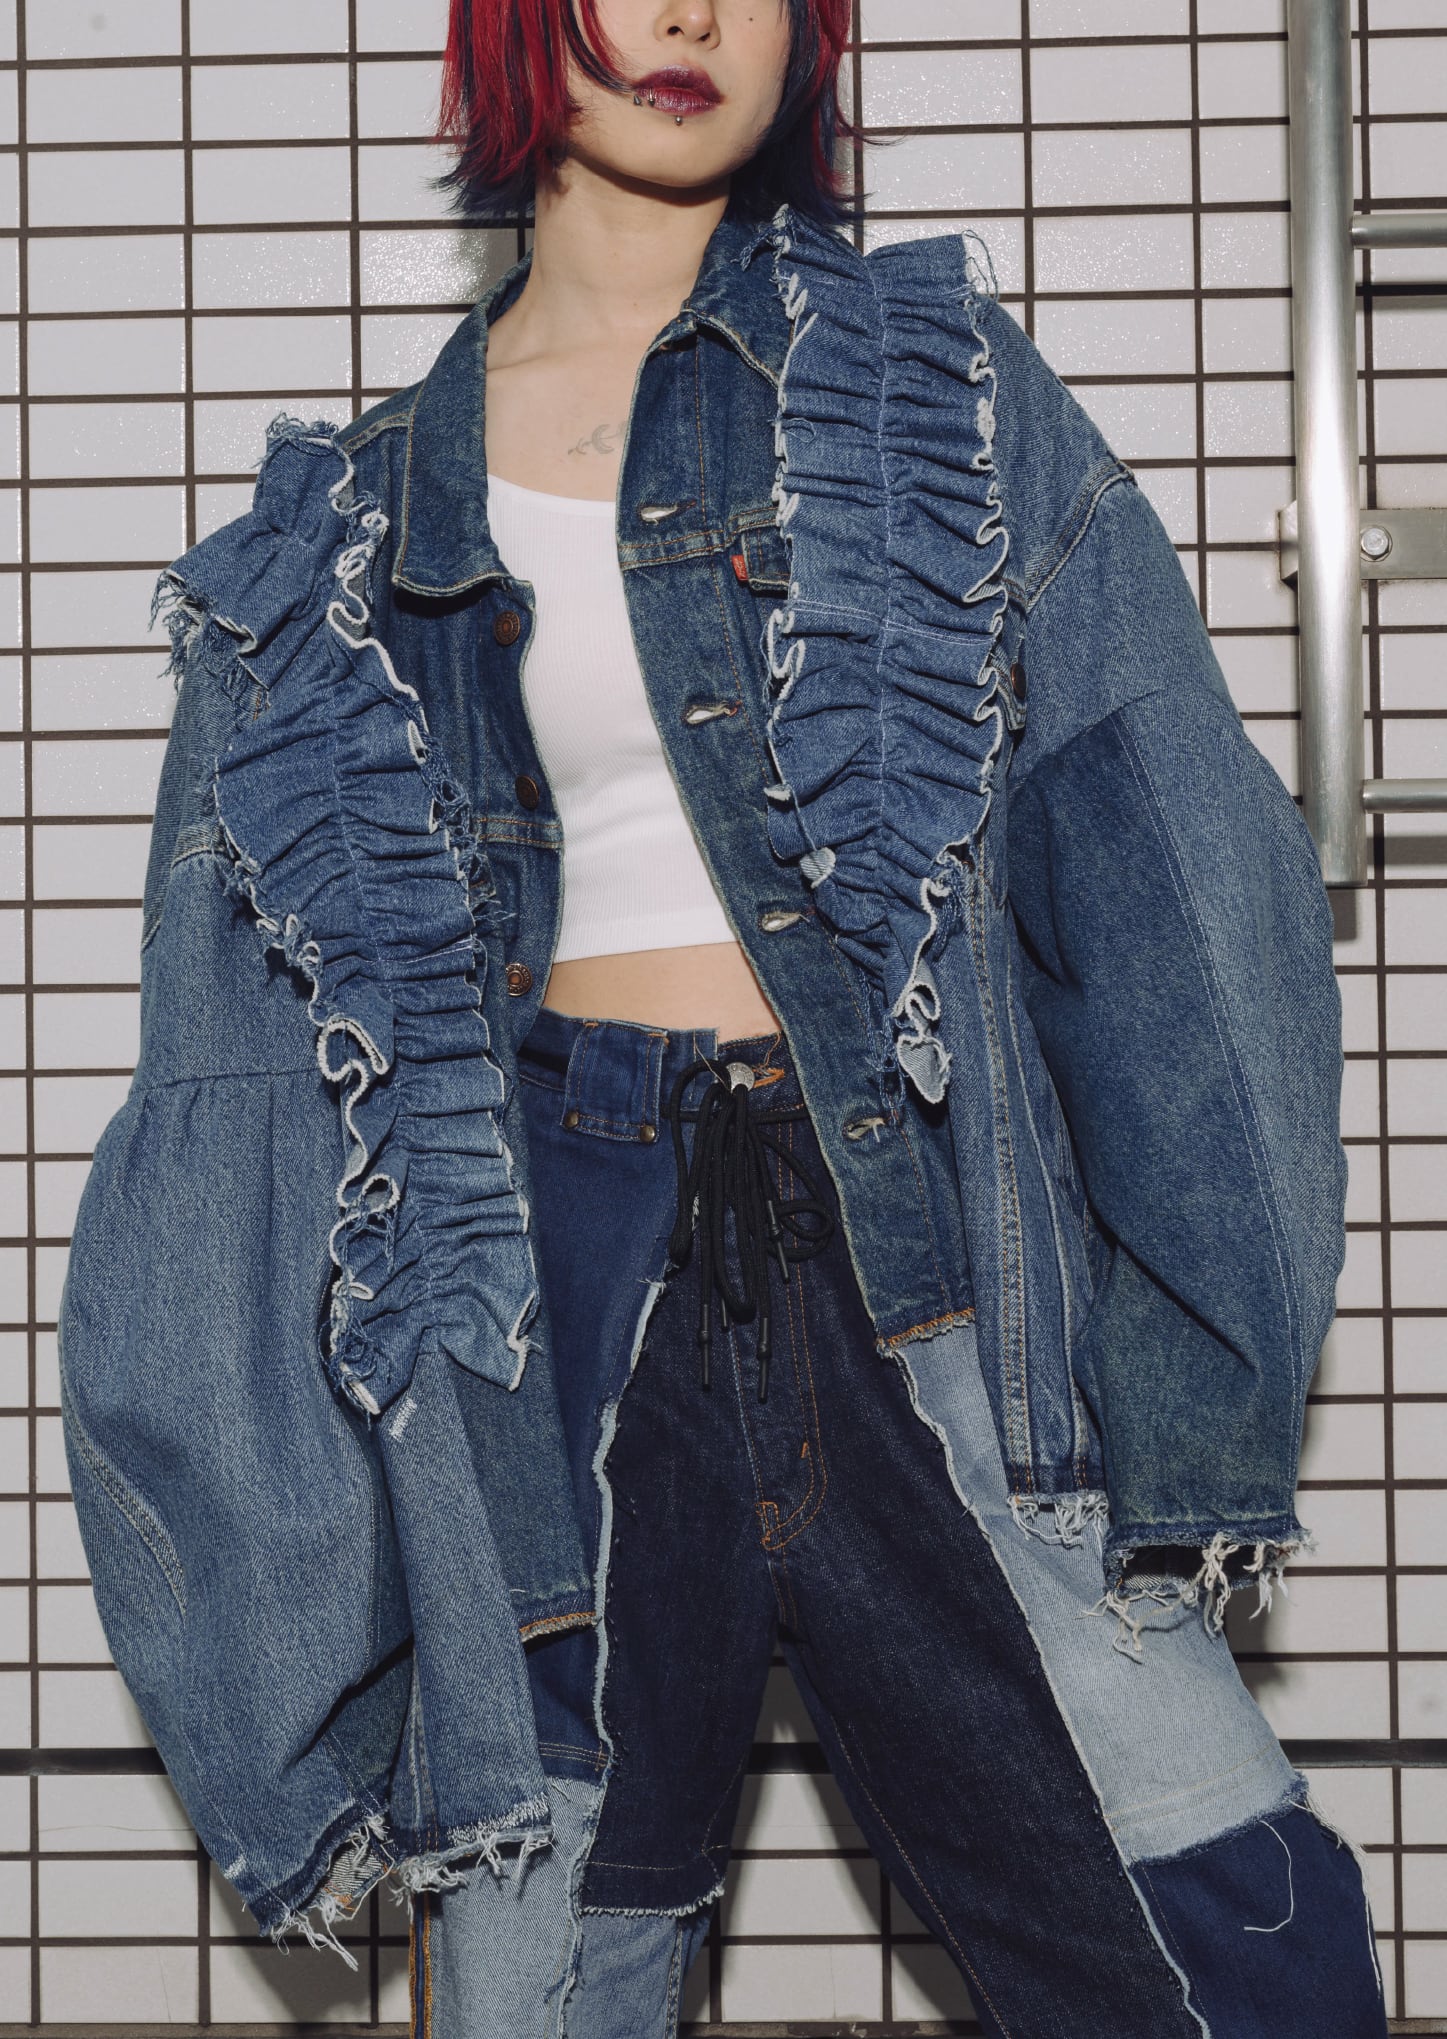 Reconstructed denim jacket with gathered ruffles -ギャザーフリルの